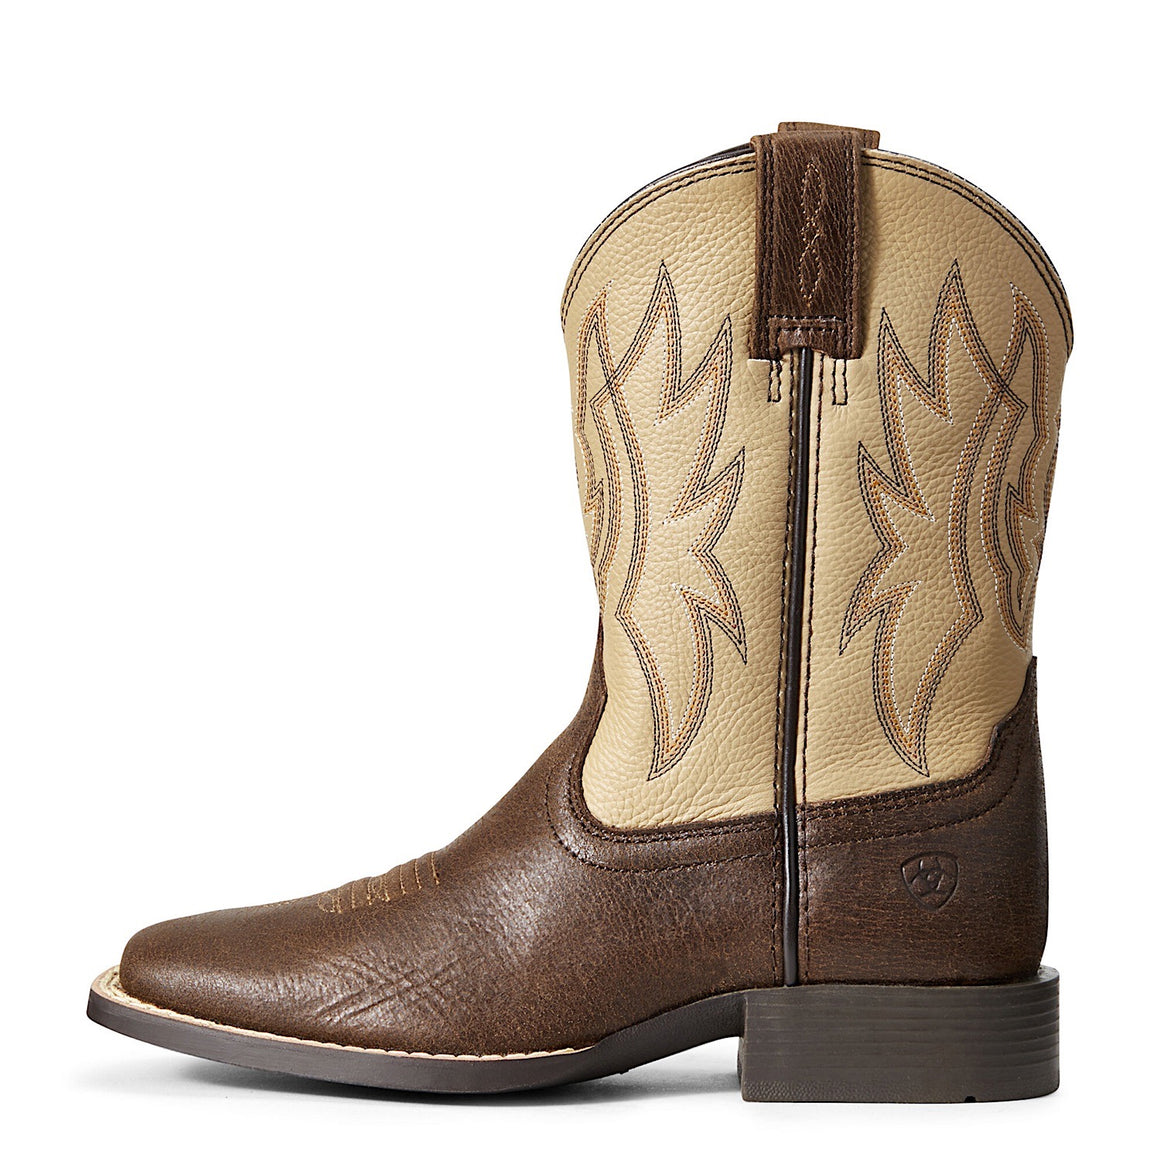 Buy Ariat Kids Boots - Discount Prices & Australia-Wide Delivery - The ...